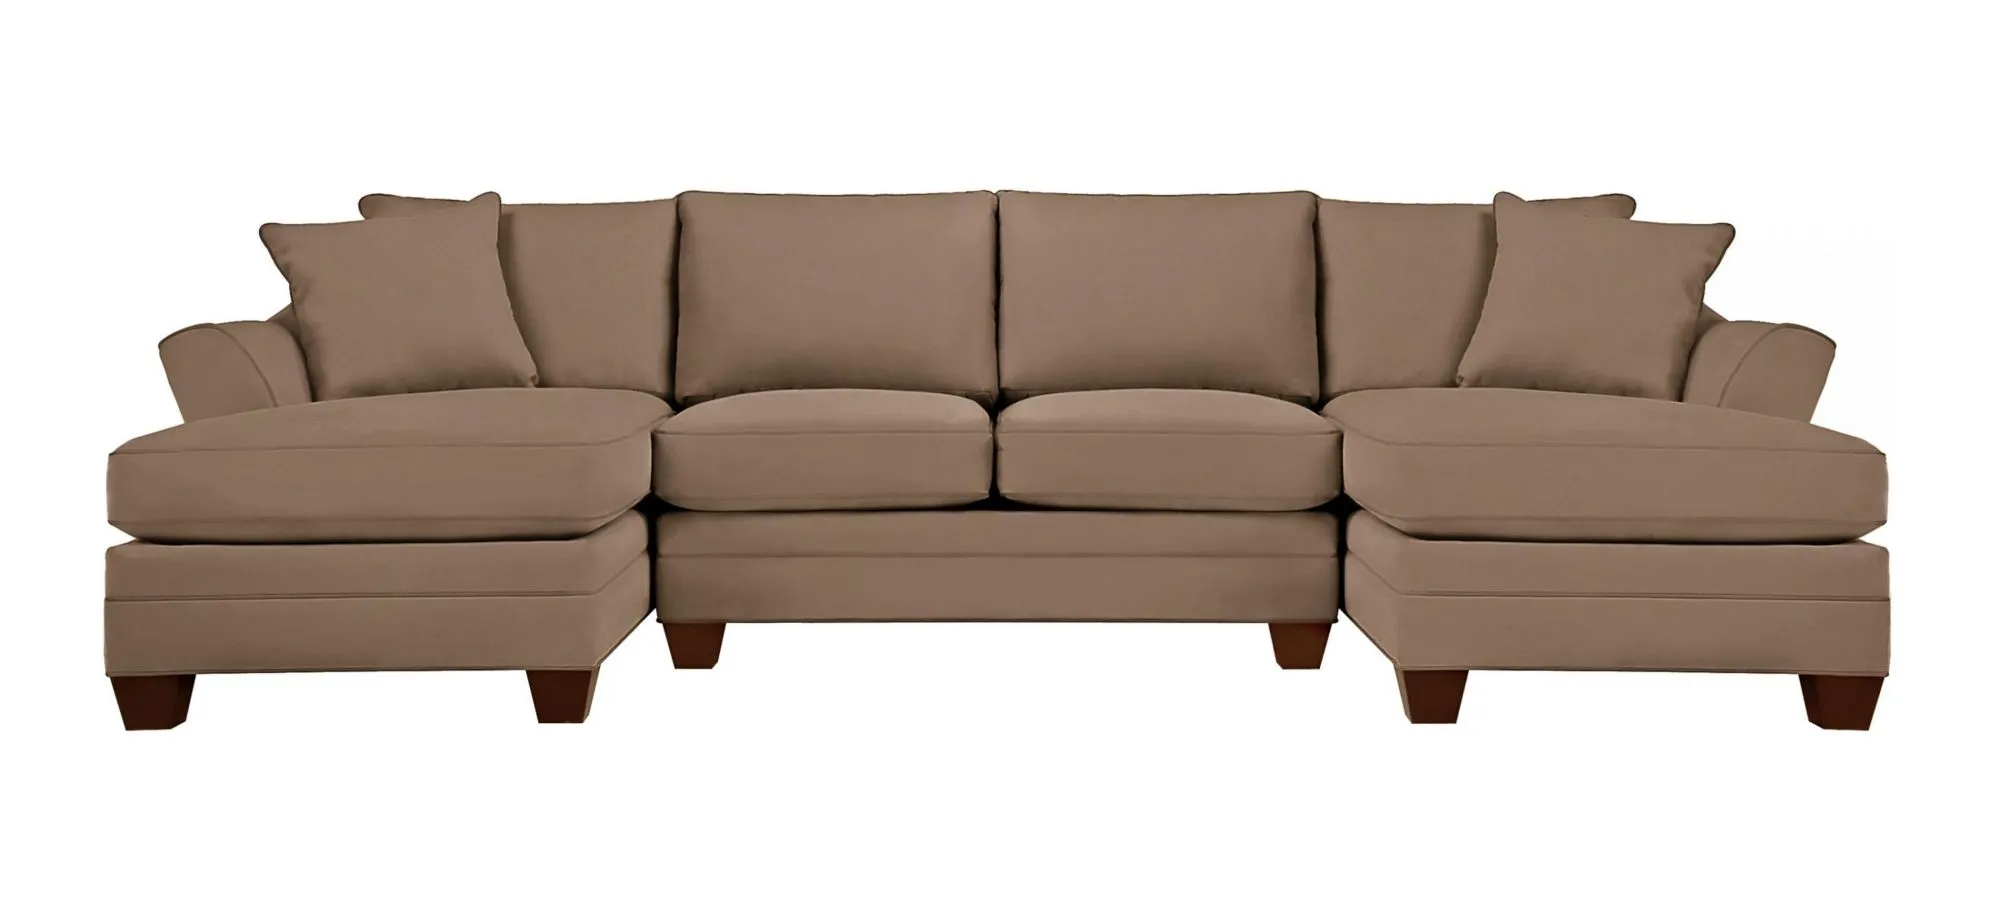 Foresthill 3-pc. Symmetrical Chaise Sectional Sofa in Suede So Soft Khaki by H.M. Richards